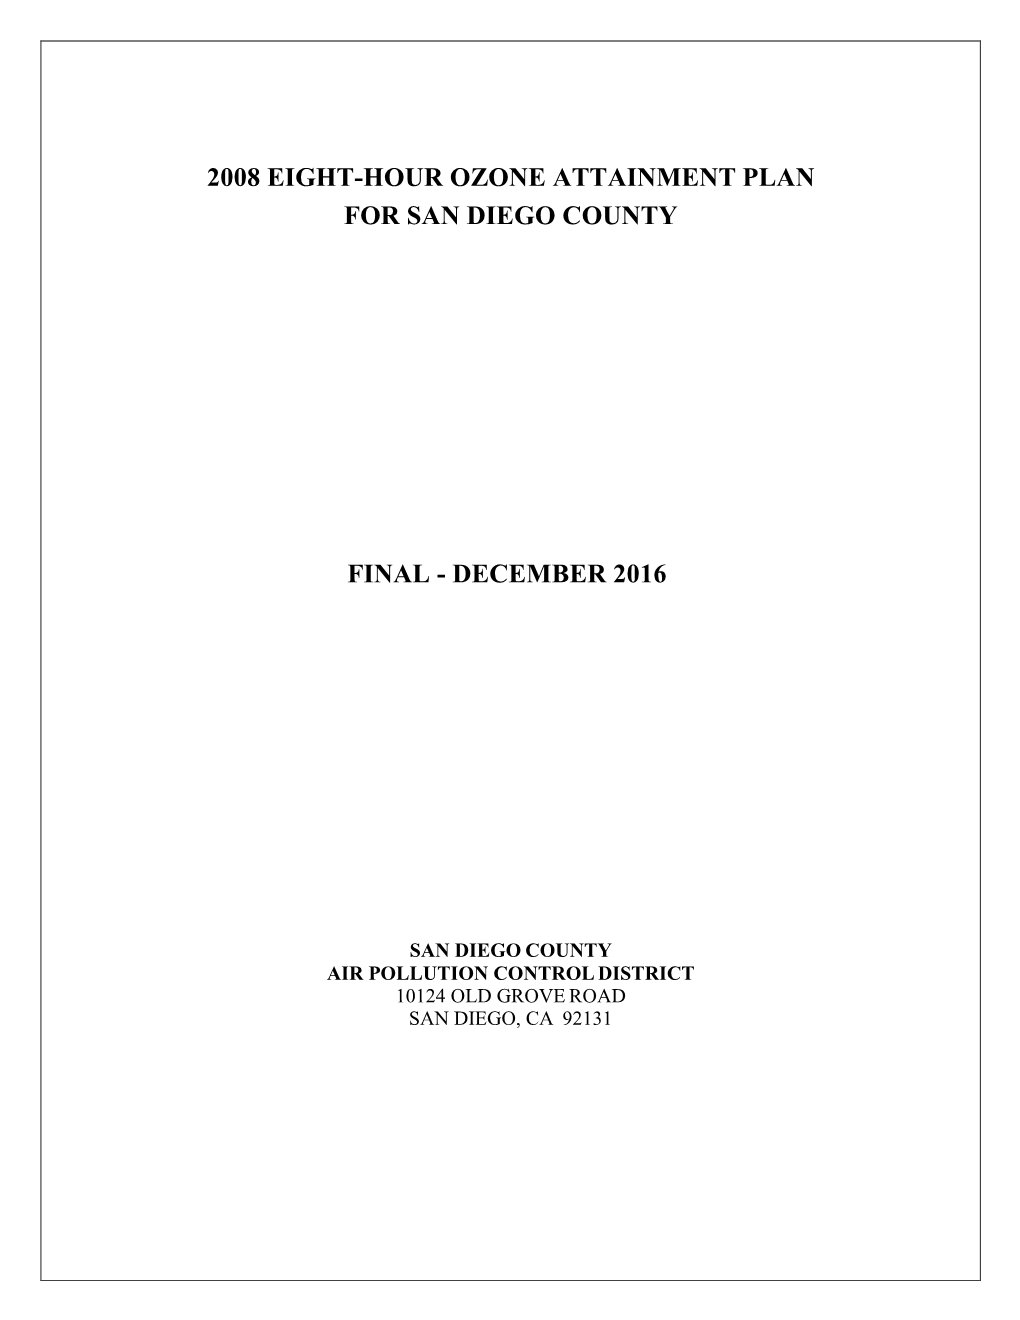 2008 Eight-Hour Ozone Attainment Plan for San Diego County